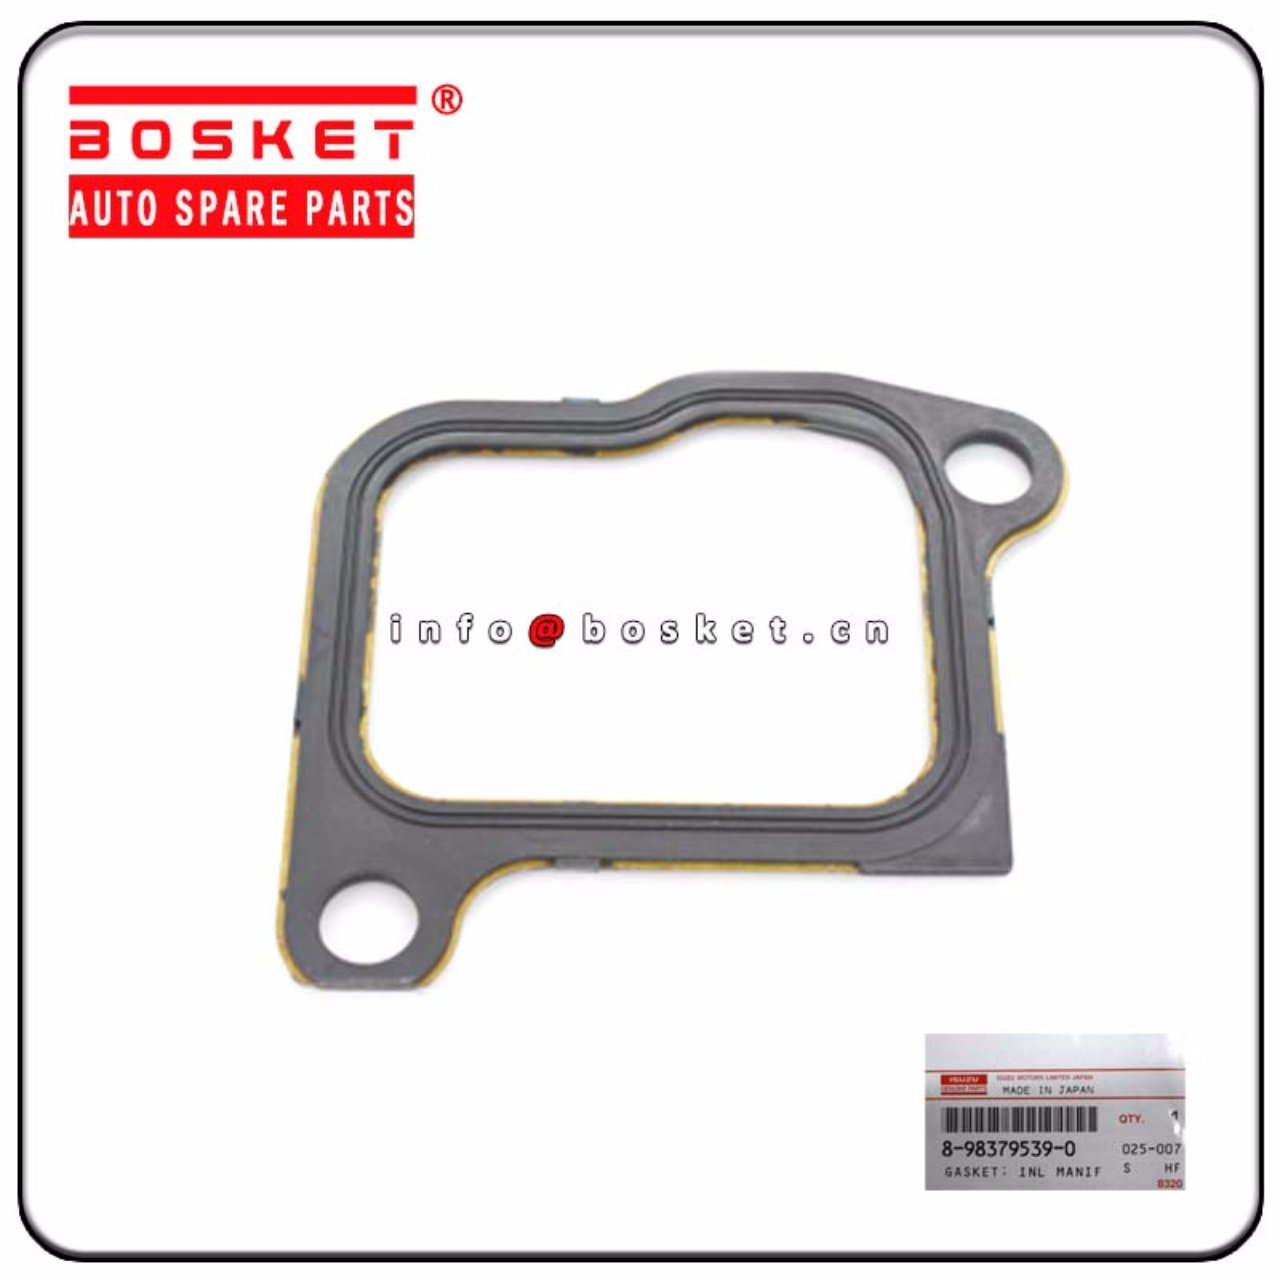 8-98379539-0 8983795390 Inlet Manifold To Head Gasket Suitable for ISUZU